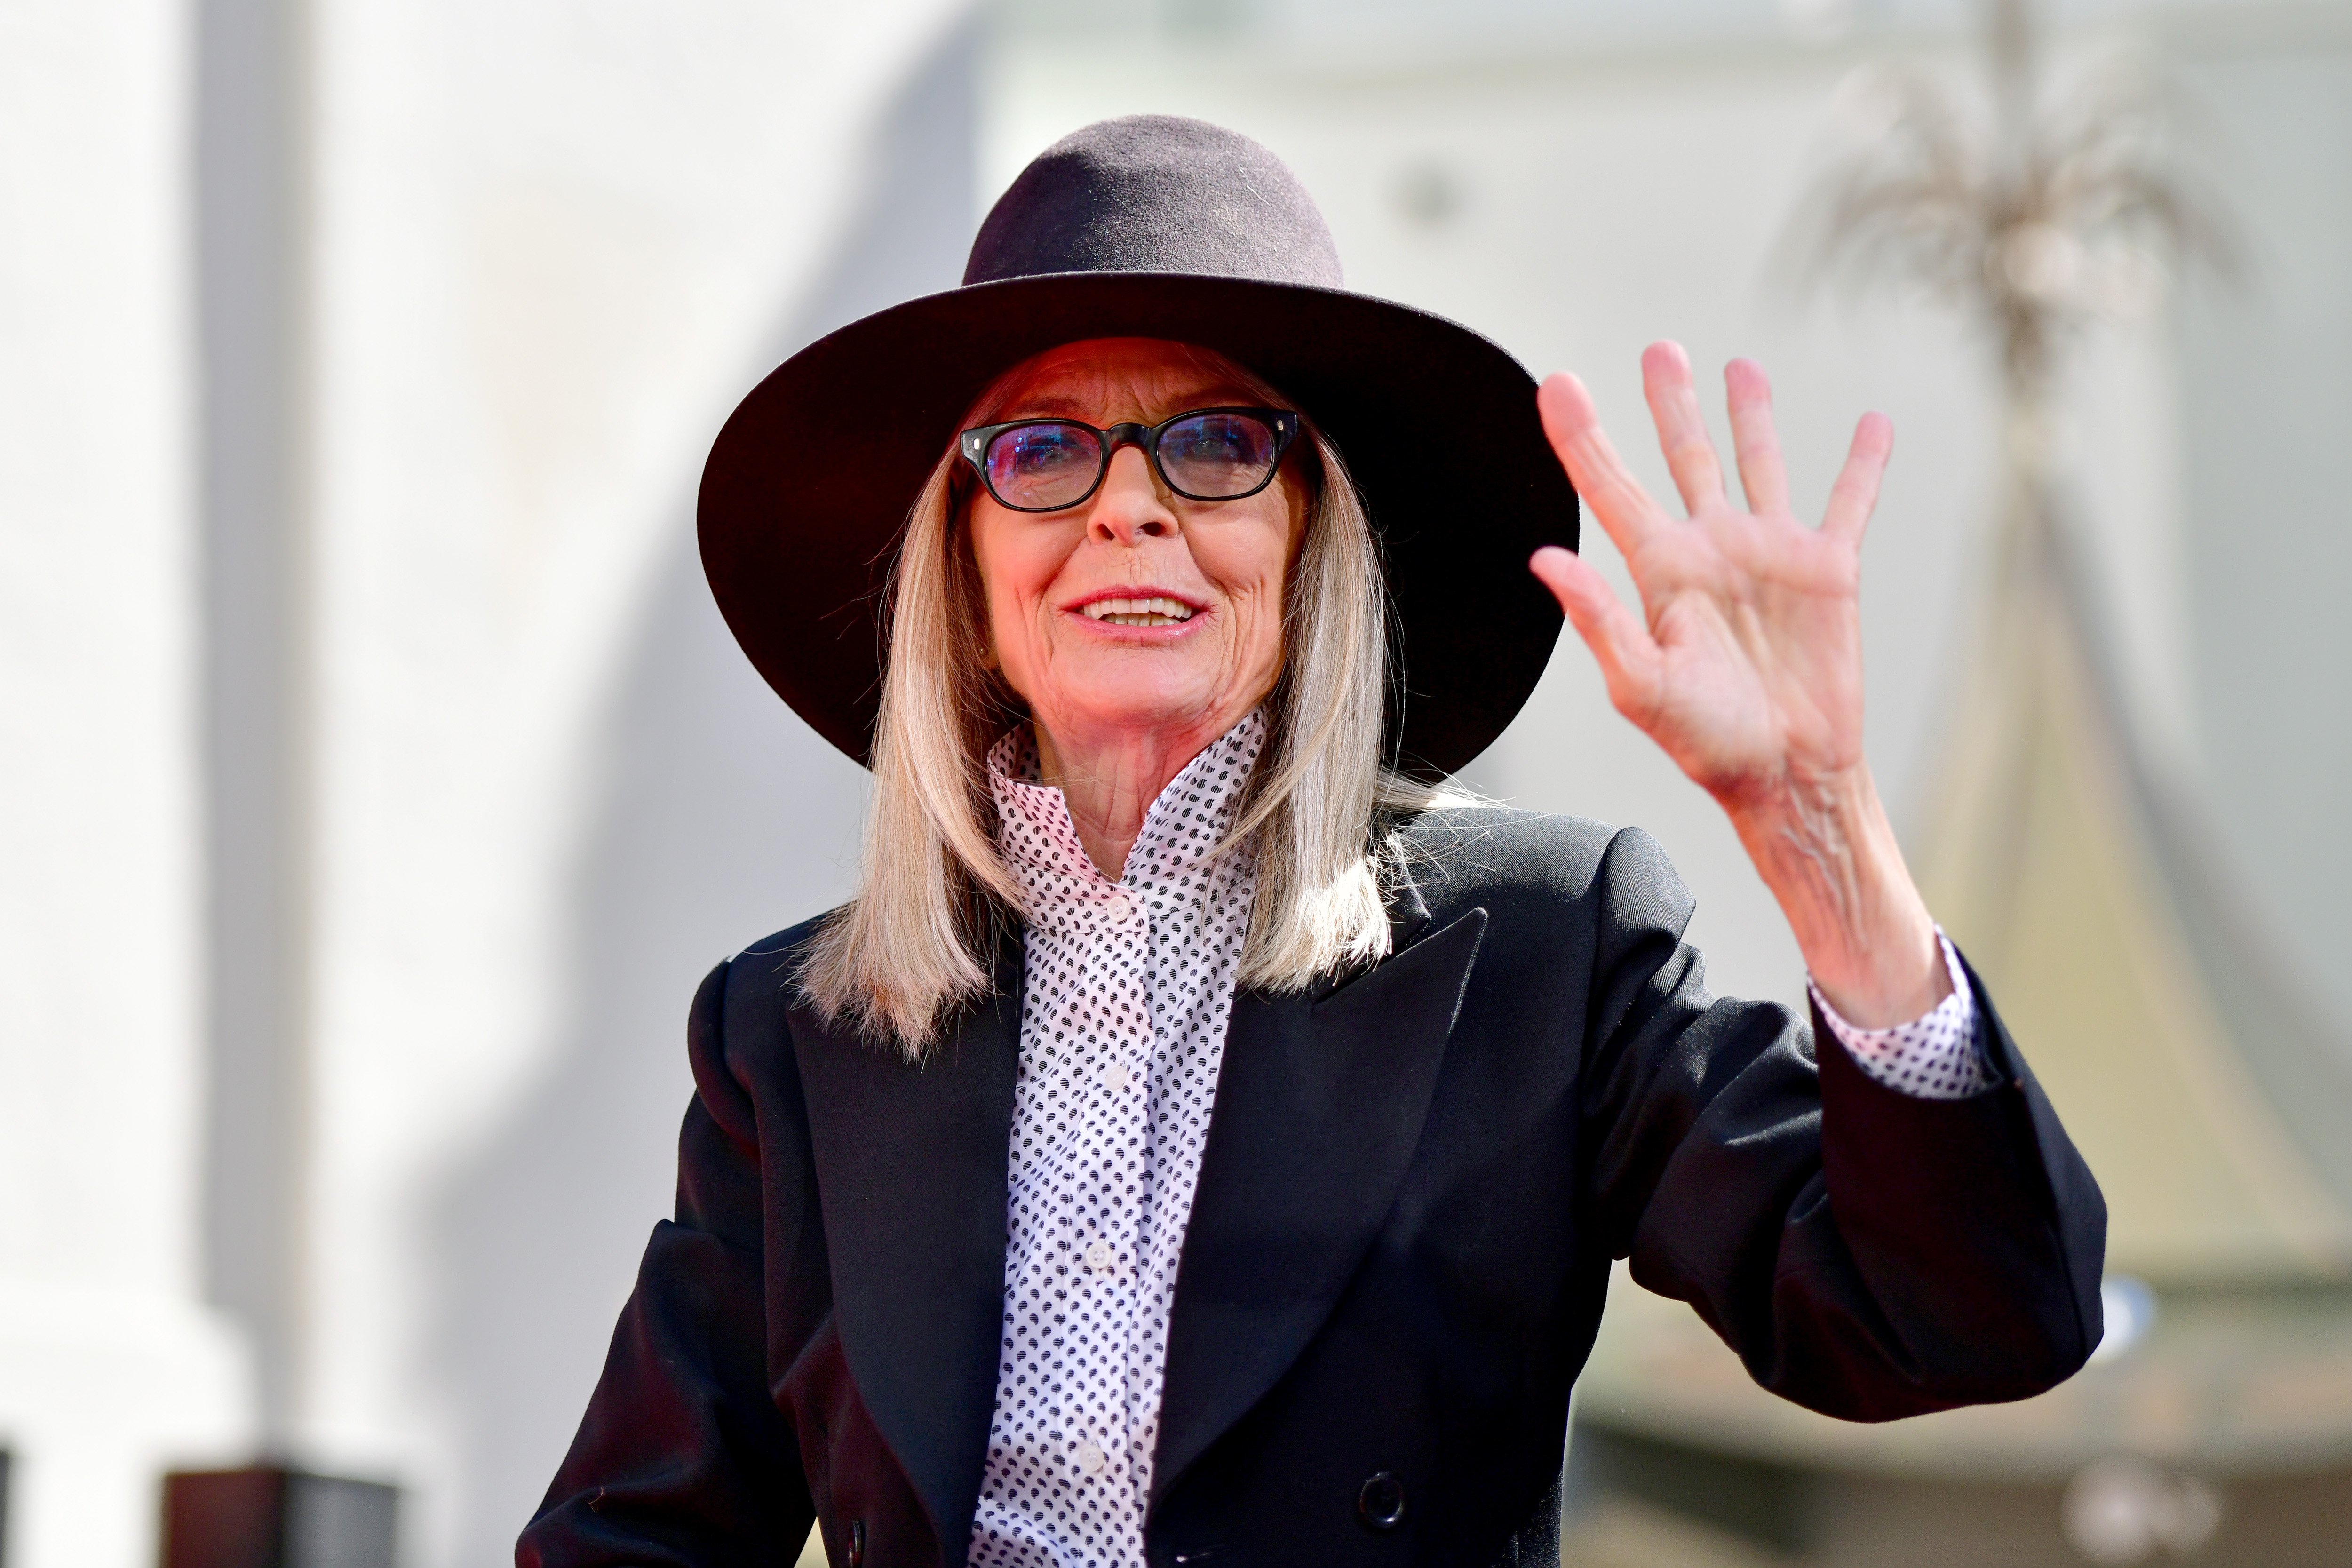 Diane Keaton on August 11, 2022 in Hollywood, California. | Source: Getty Images